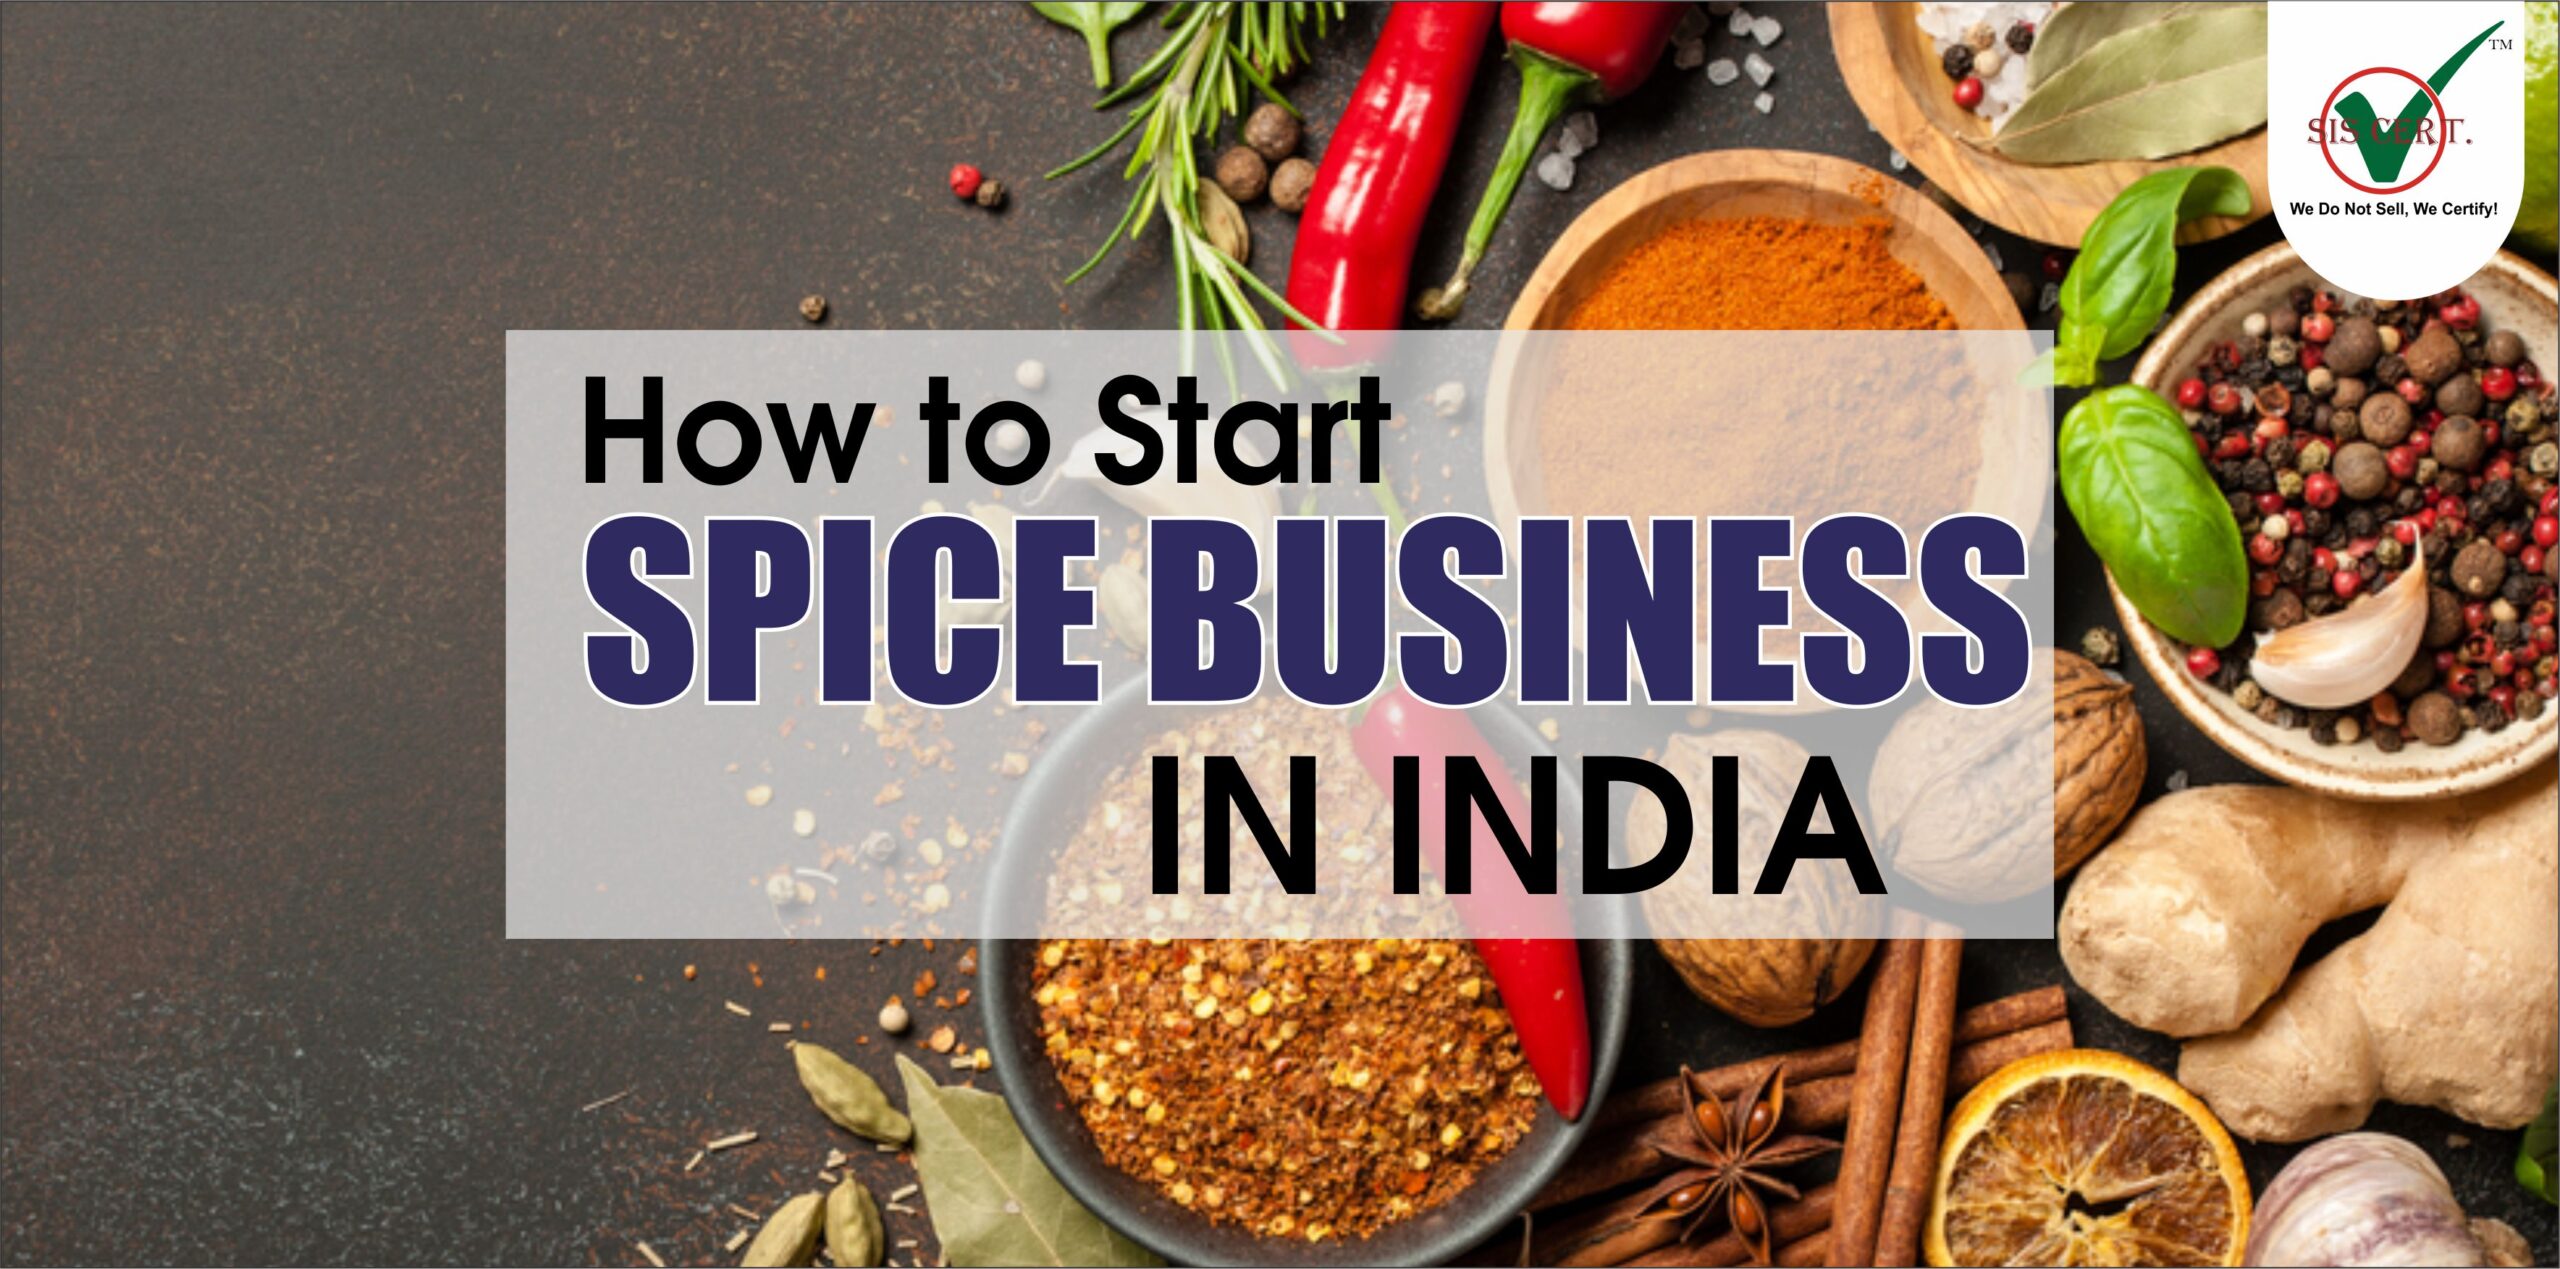 How to Start a Spice Business in India